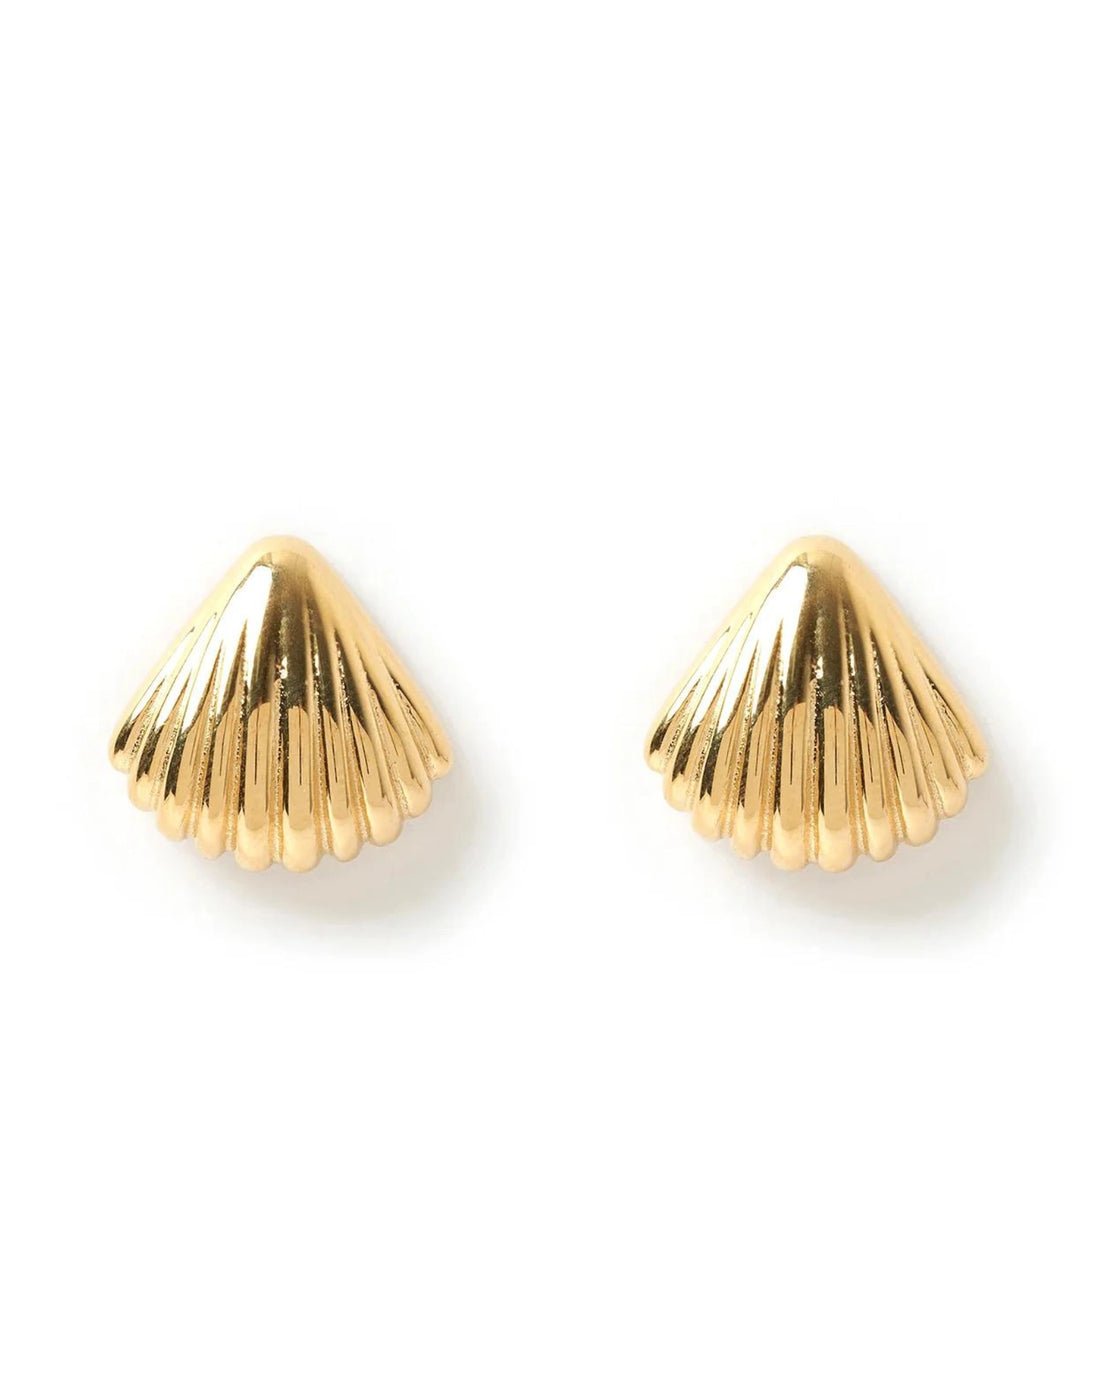 Perla Gold Shell Earrings by Arms of Eve 🐚